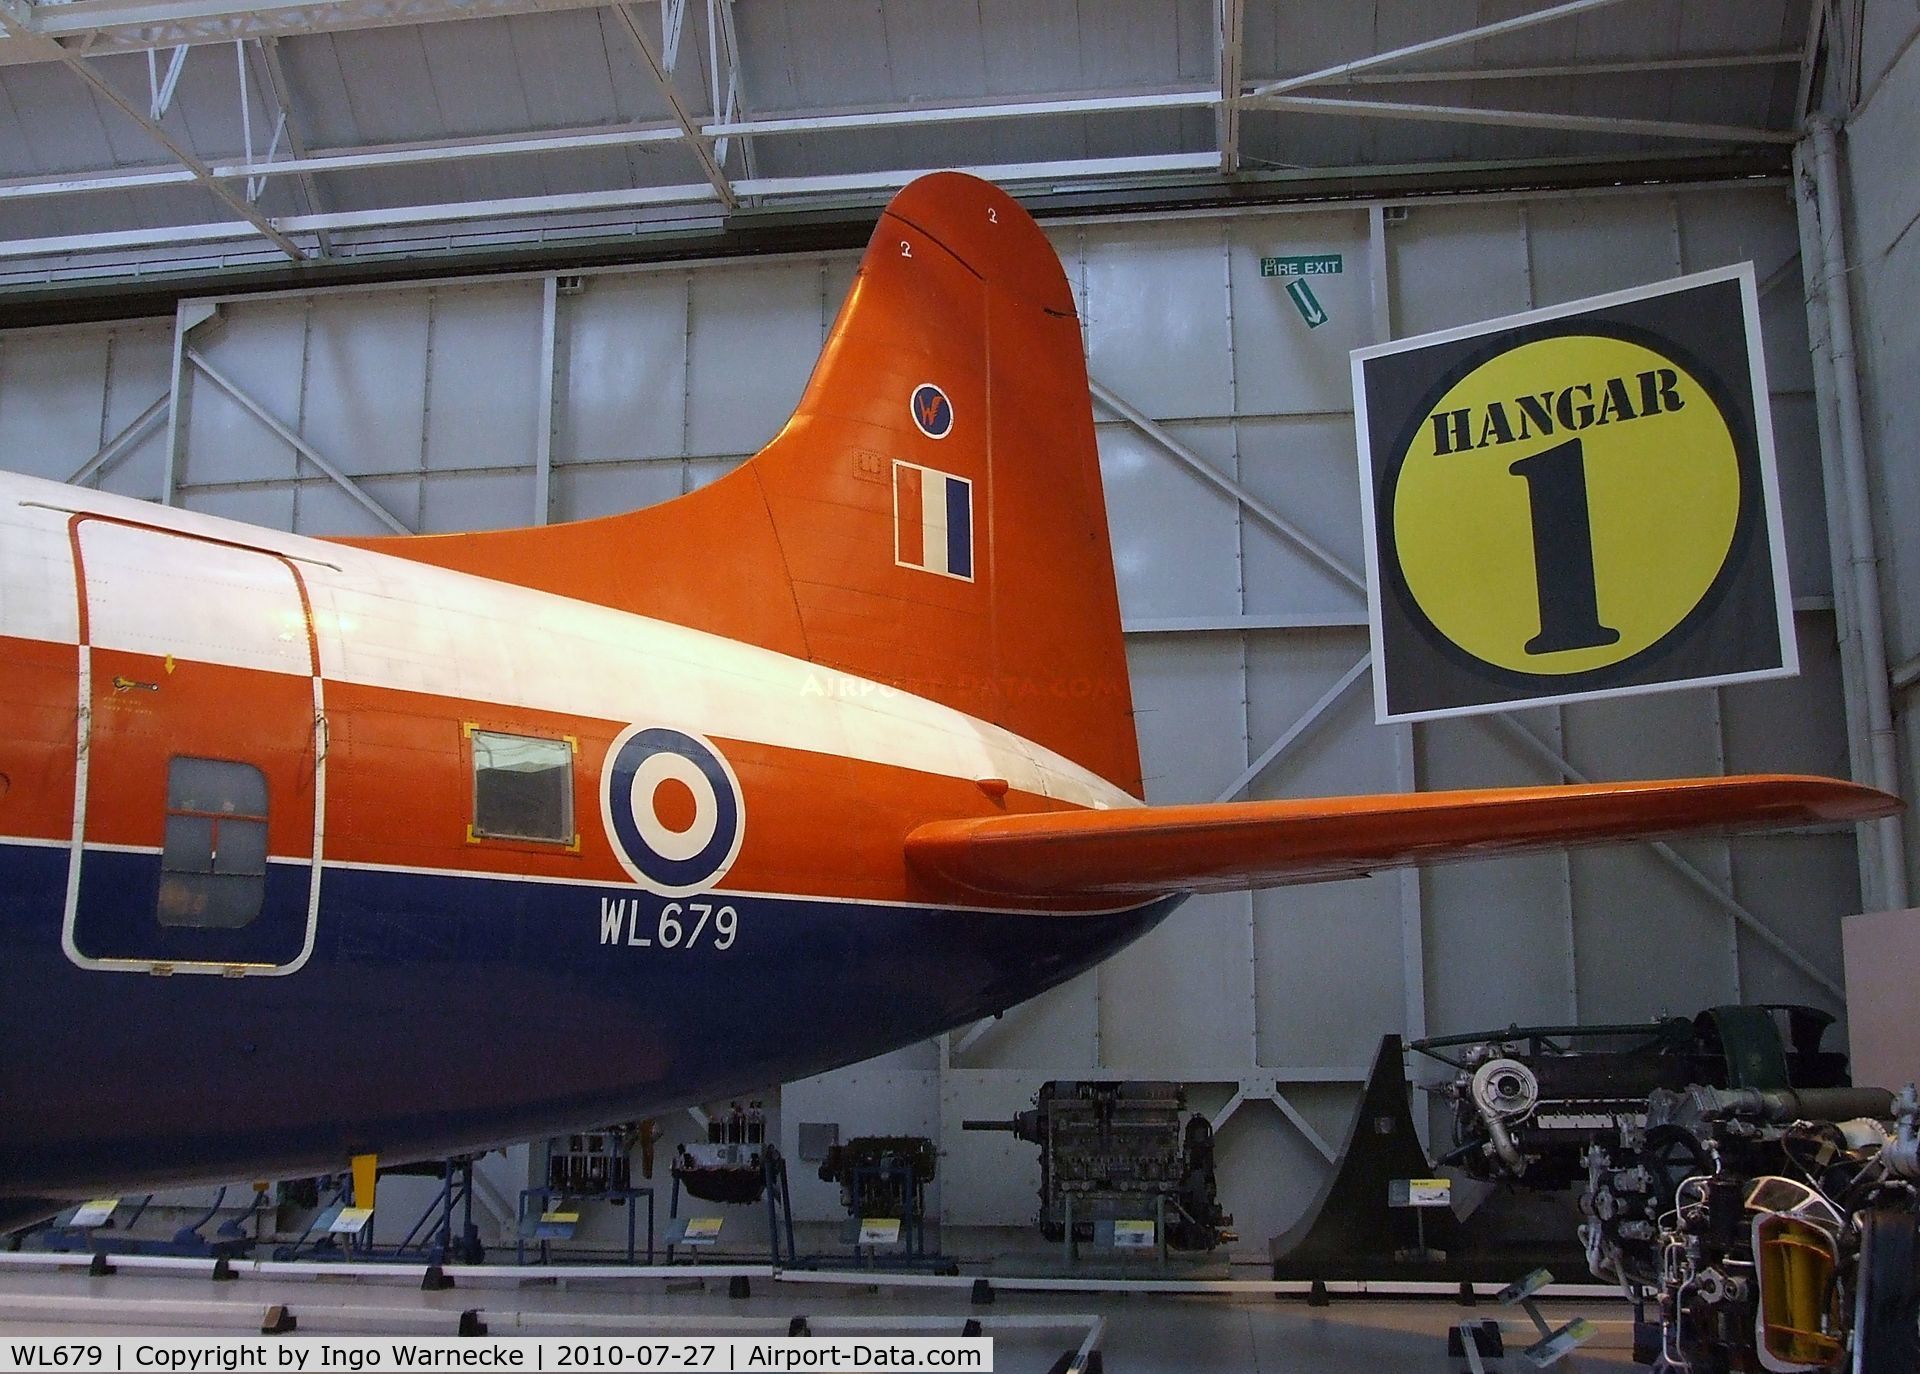 WL679, 1953 Vickers Varsity T.1 C/N Not found WL679, Vickers Varsity T1 at the RAF Museum, Cosford